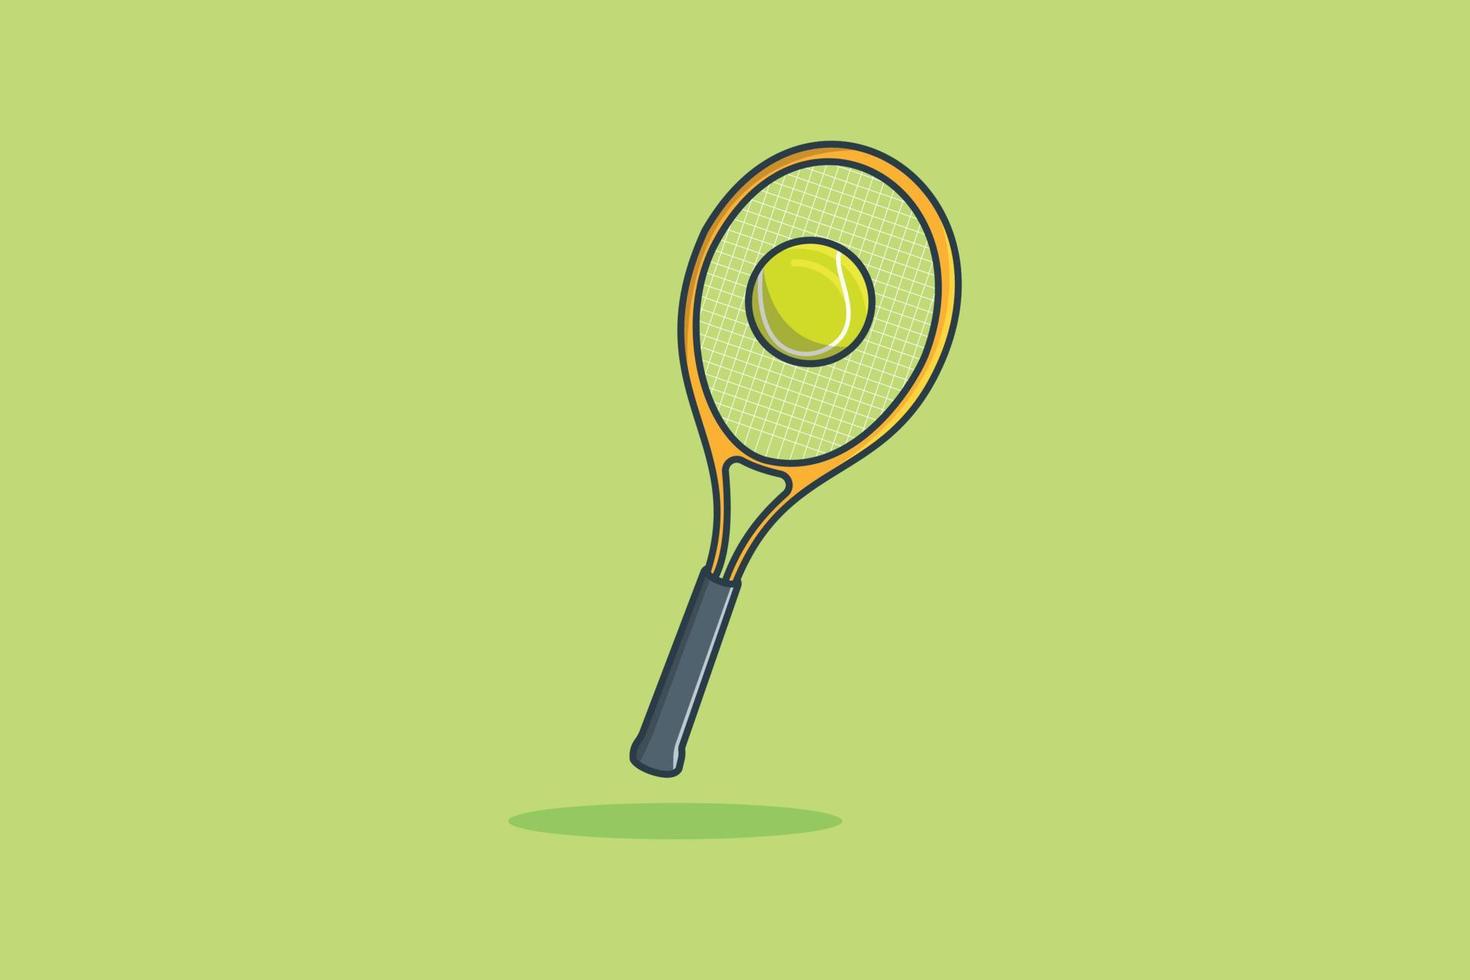 Tennis Ball with Racket vector icon illustration. Sport object icon design concept. Racket hitting a Green ball design.